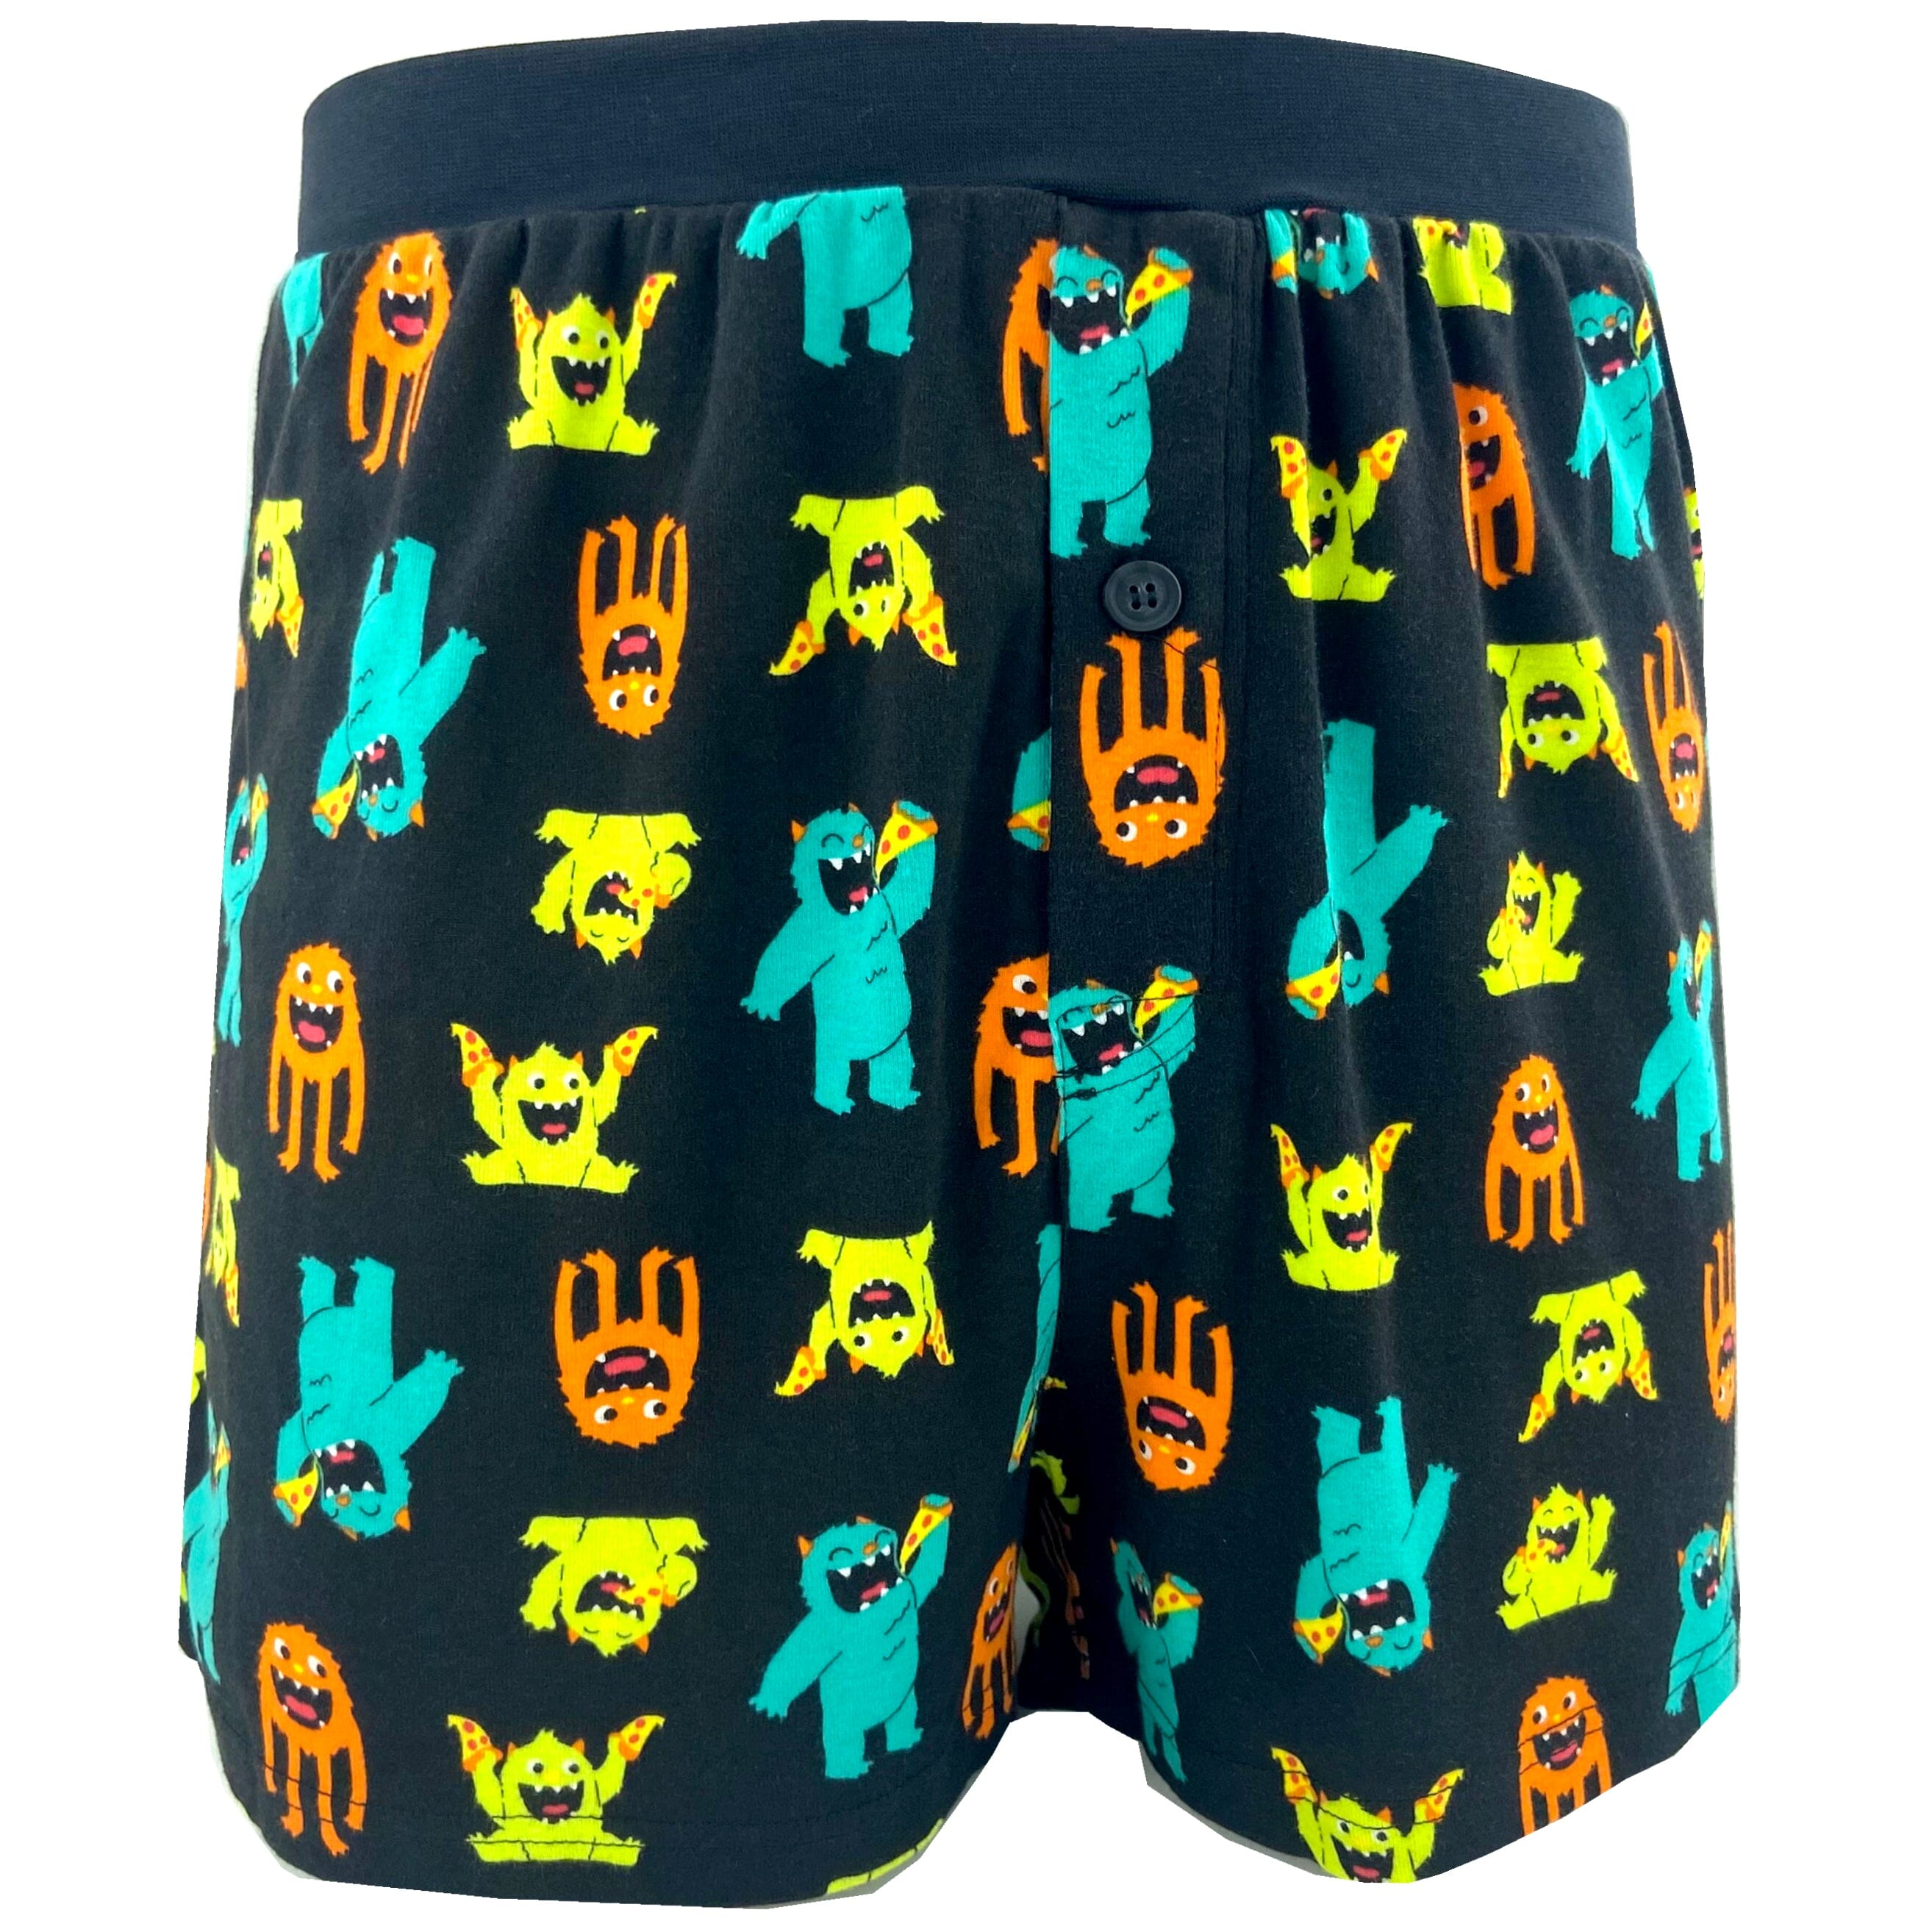 Cool And Fun Pizza Slices Underpants Cotton Panties Male